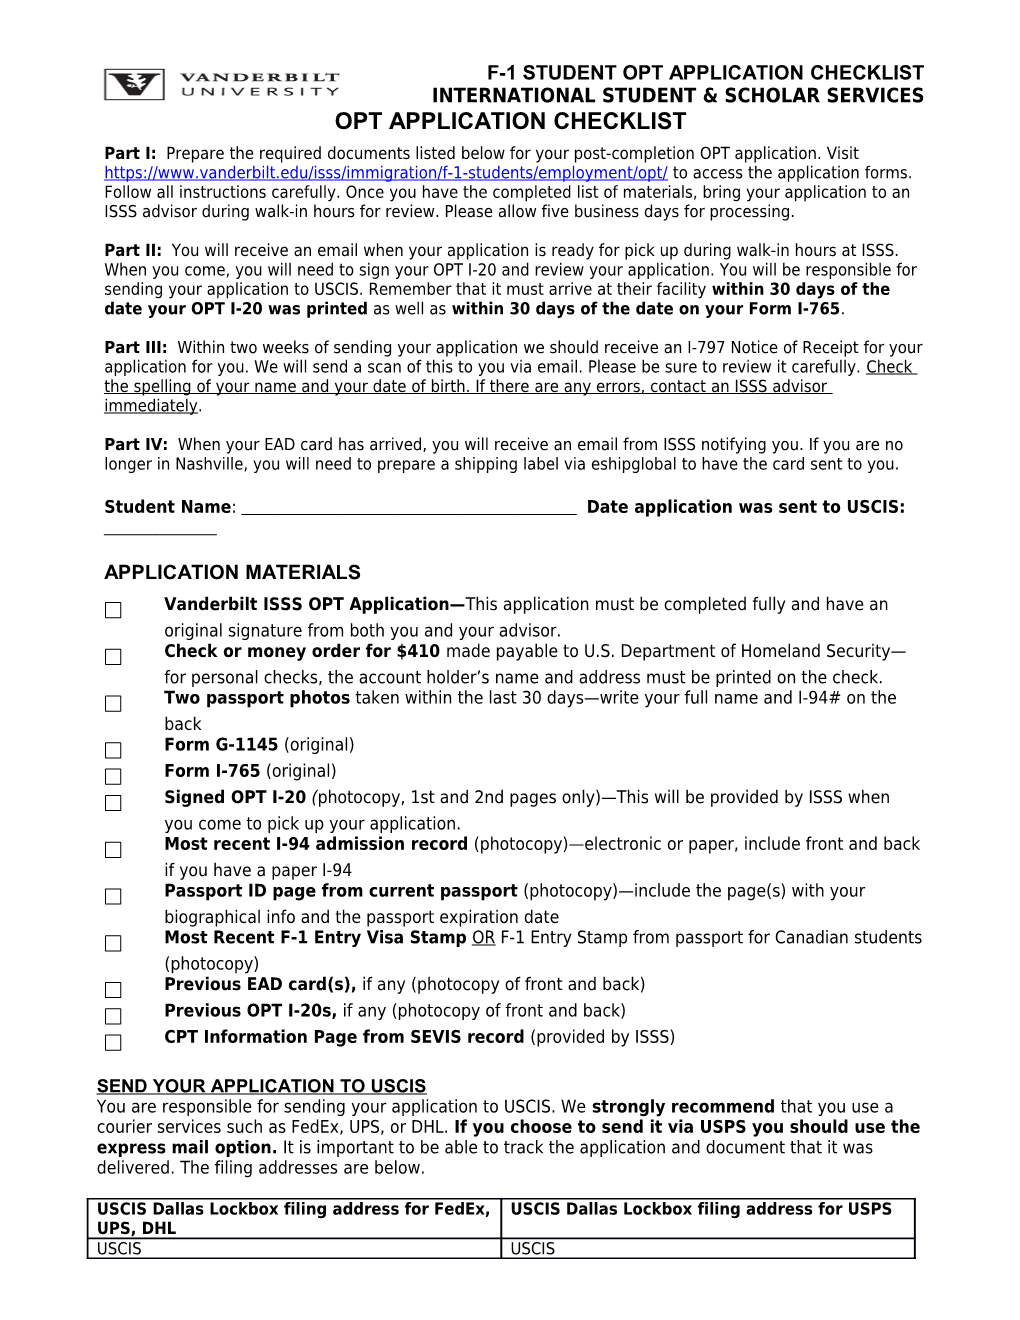 Checklist of Documents Required For